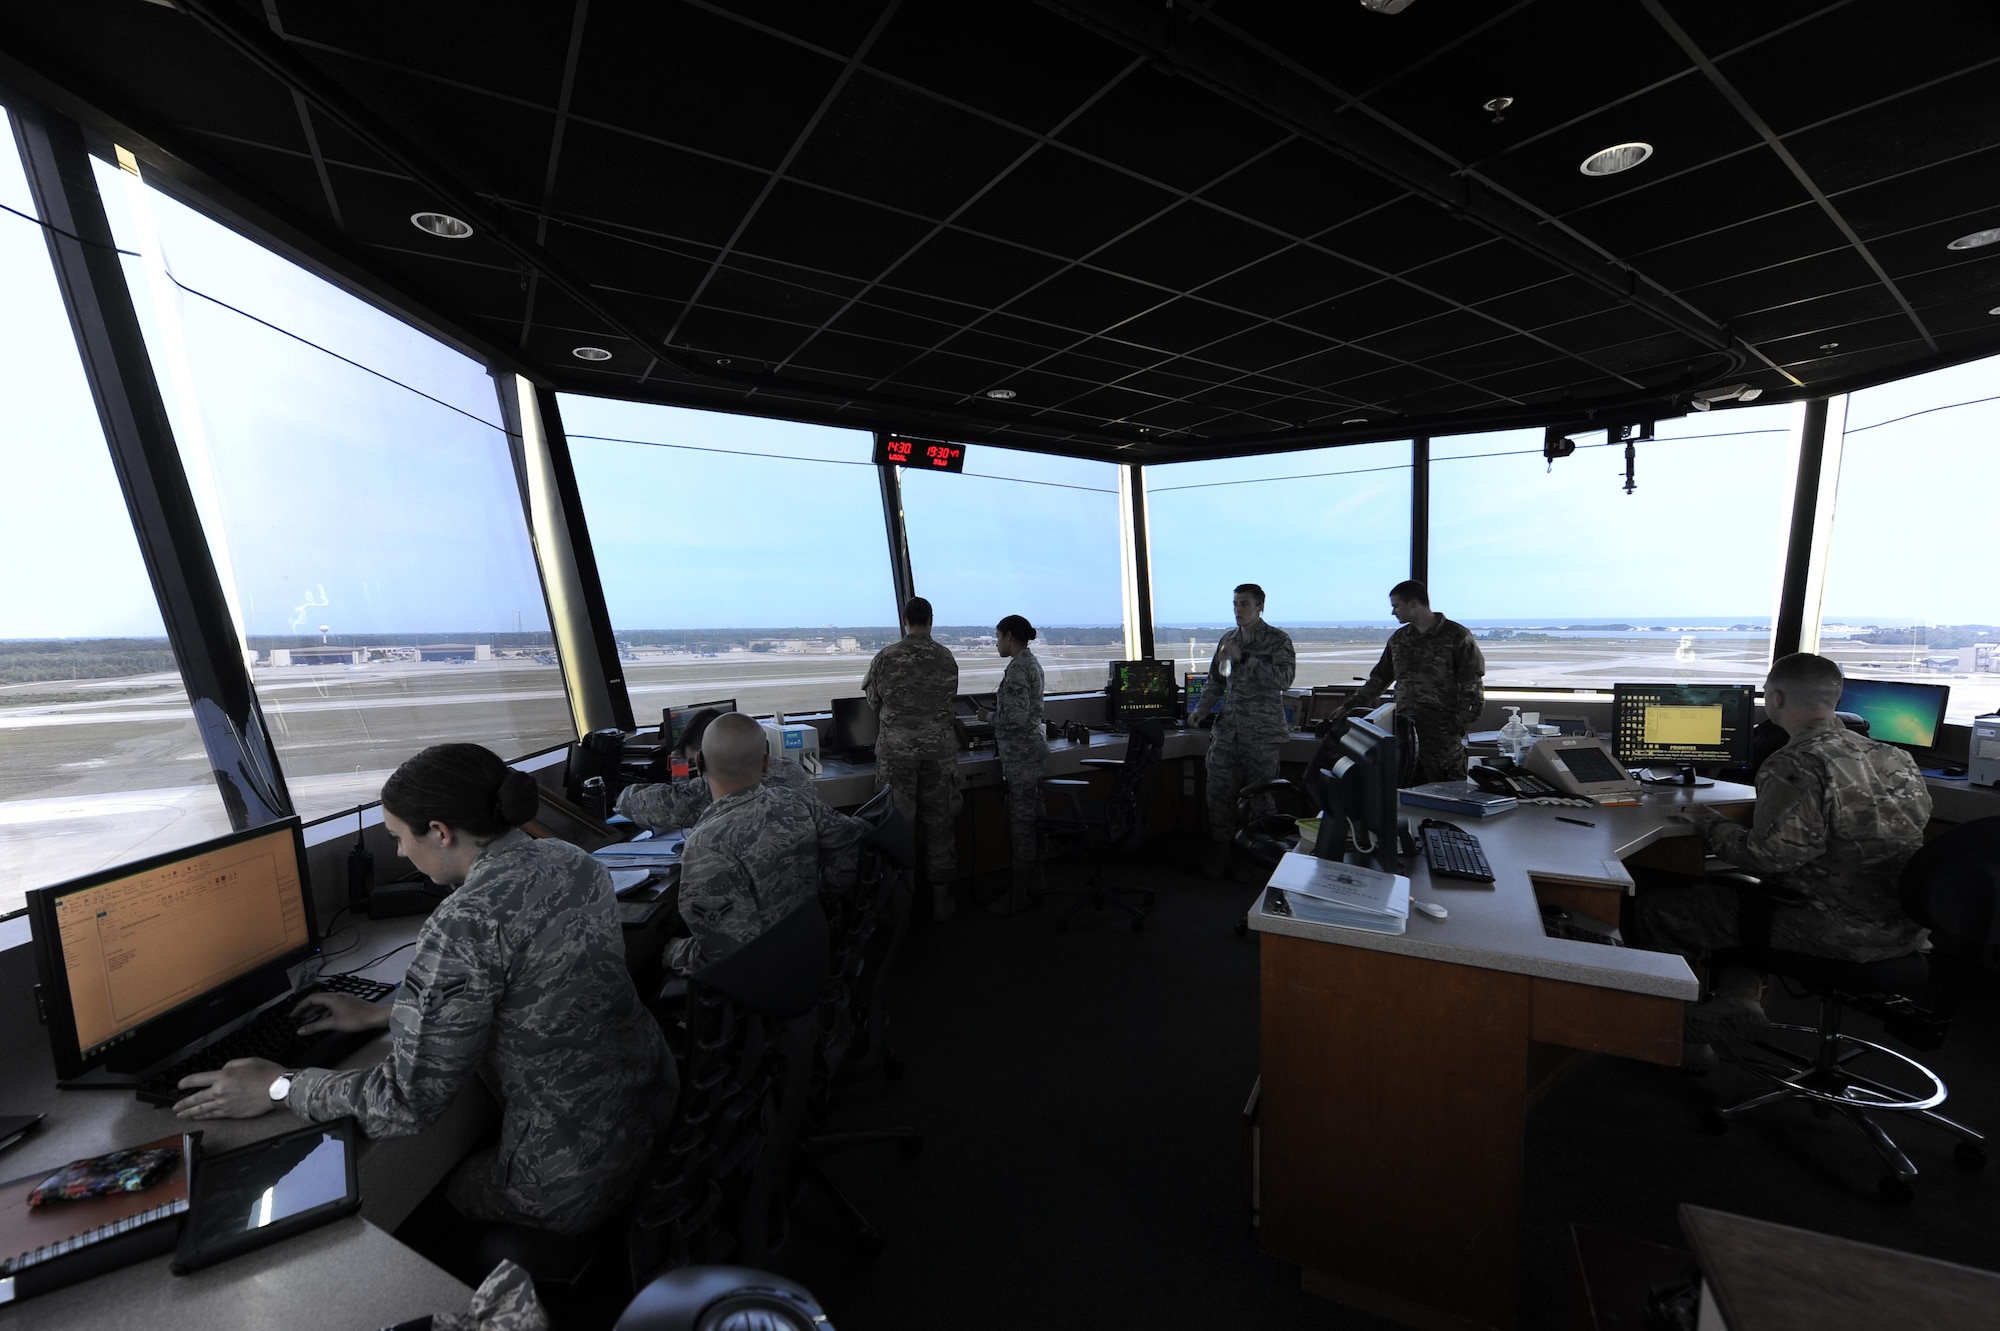 Air traffic controllers monitor incoming and scheduled aircraft at Hurlburt Field, Fla., May 3, 2017. Air traffic controllers provide safe and organized flow of aircraft on the flight line and in the air by monitoring and keeping track of scheduled incoming and departing aircraft .(U.S. Air Force photo by Airman 1st Class Isaac O. Guest IV)